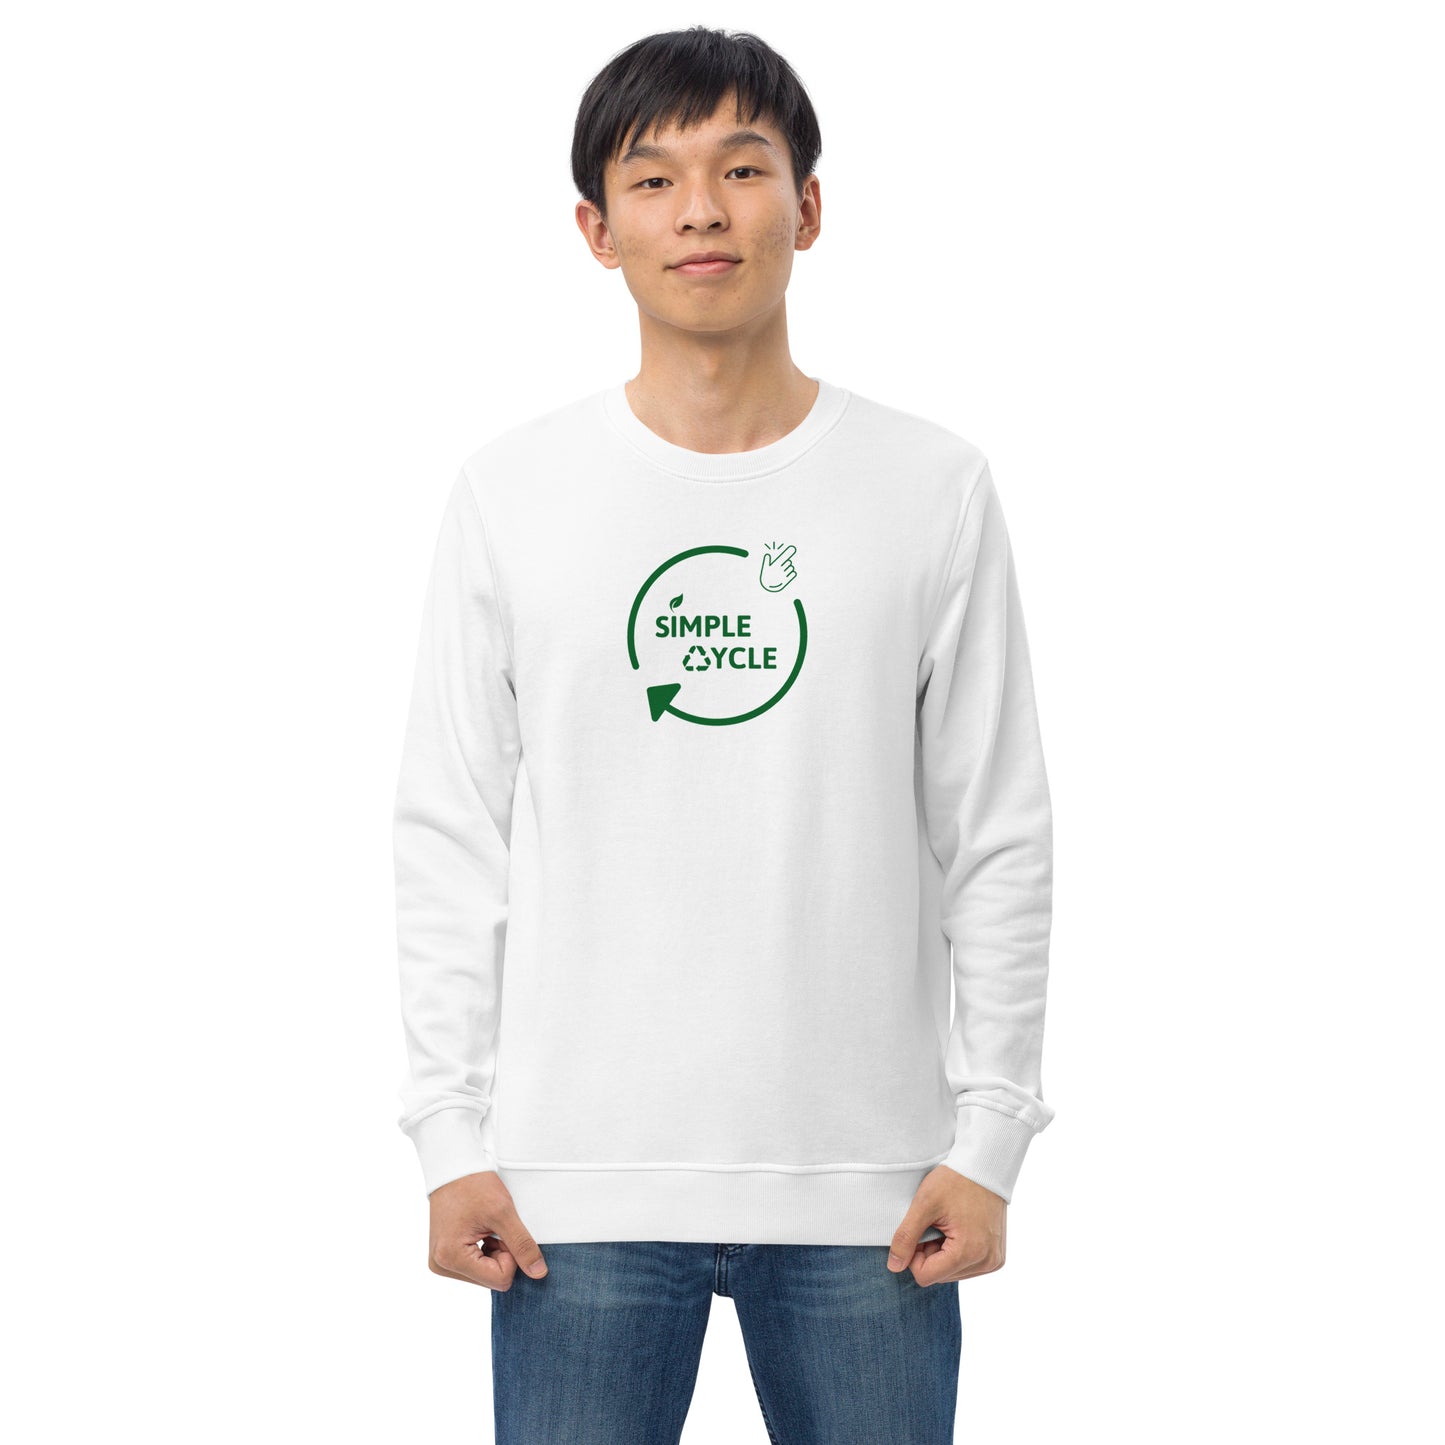 SimpleCycle Branded Unisex Organic Sweatshirt White front